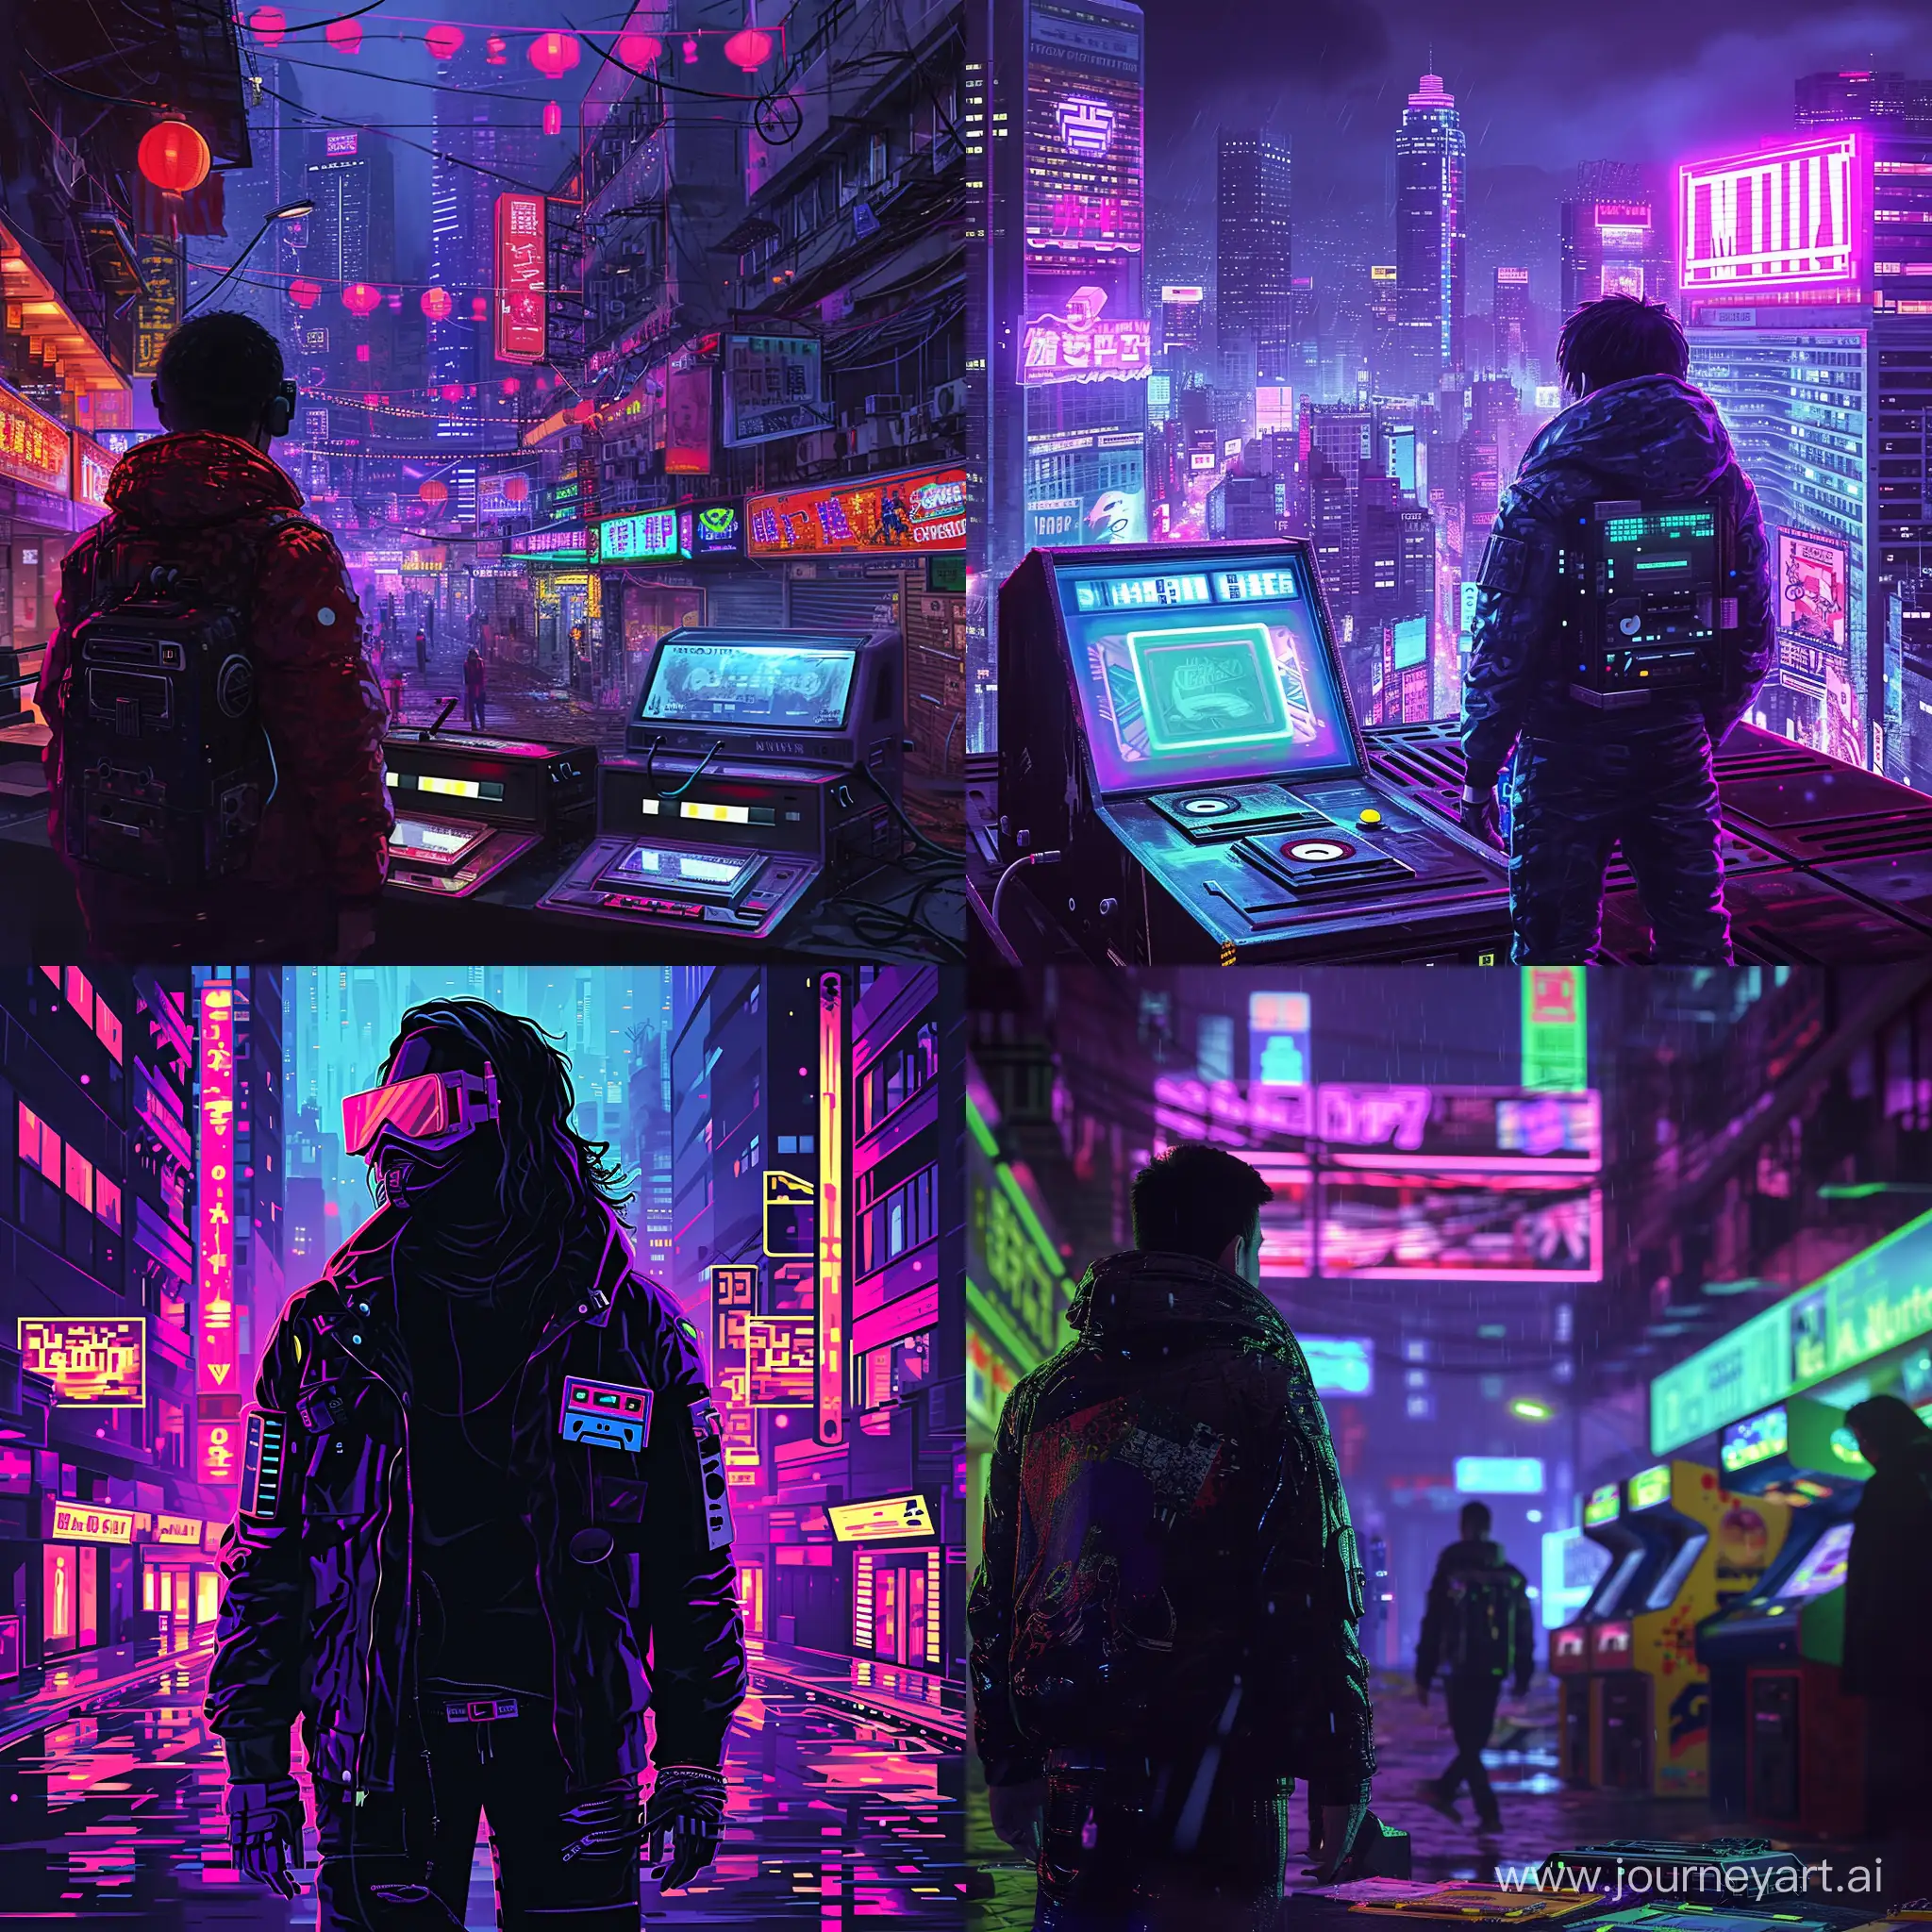 In a neon-soaked dystopian future reminiscent of the 1980s, where cyberpunk meets retro-futurism, follow the journey of a renegade hacker with a penchant for cassette tapes and arcade games. Uncover a secret government conspiracy involving sentient AI and time travel, as they navigate the gritty streets of a megacity ruled by mega-corporations and rebellious synth-pop subcultures